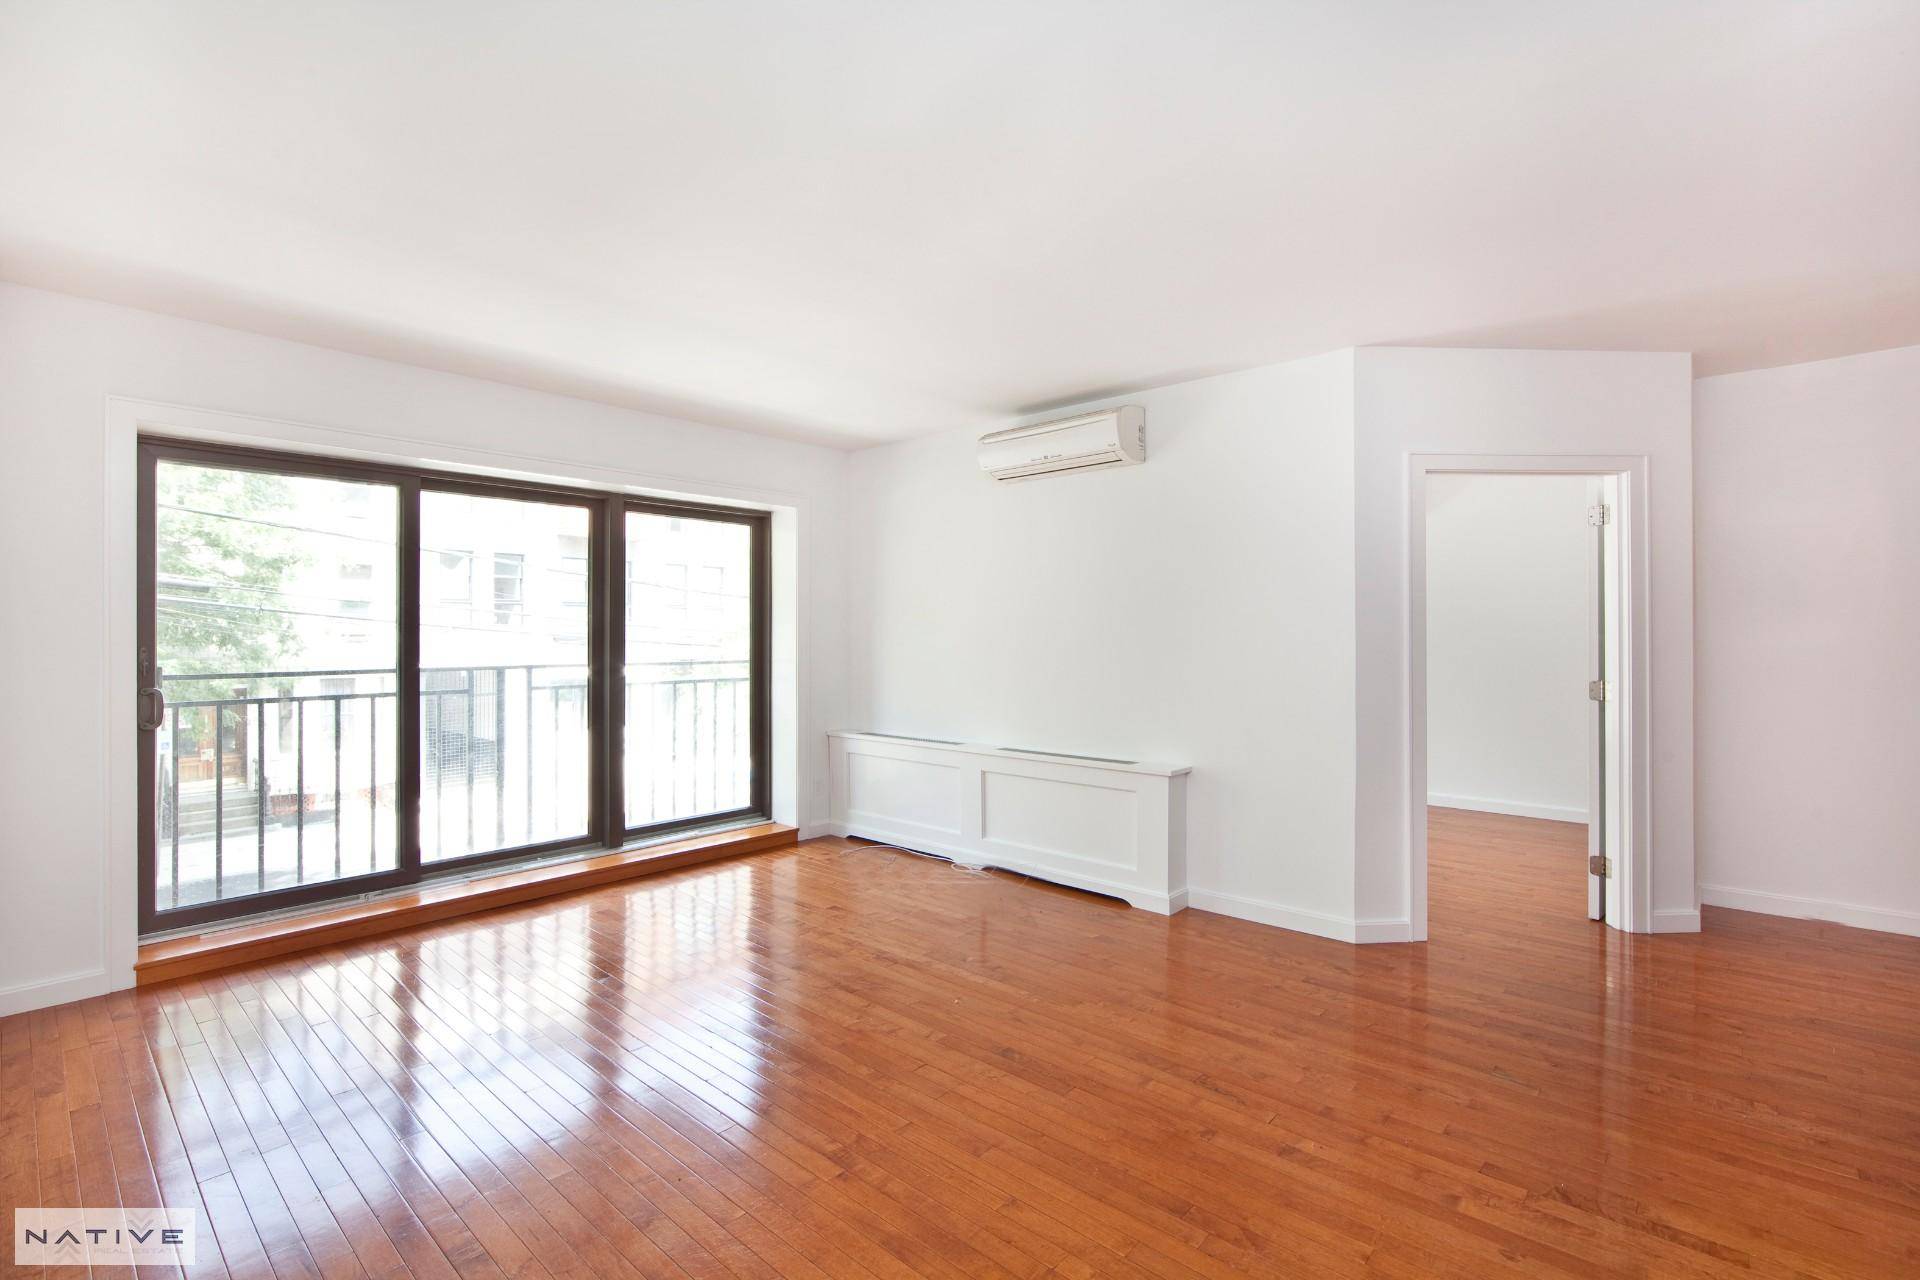 Native Real Estate is pleased to present this pristine 2nd floor condo in the heart of Greenpoint !